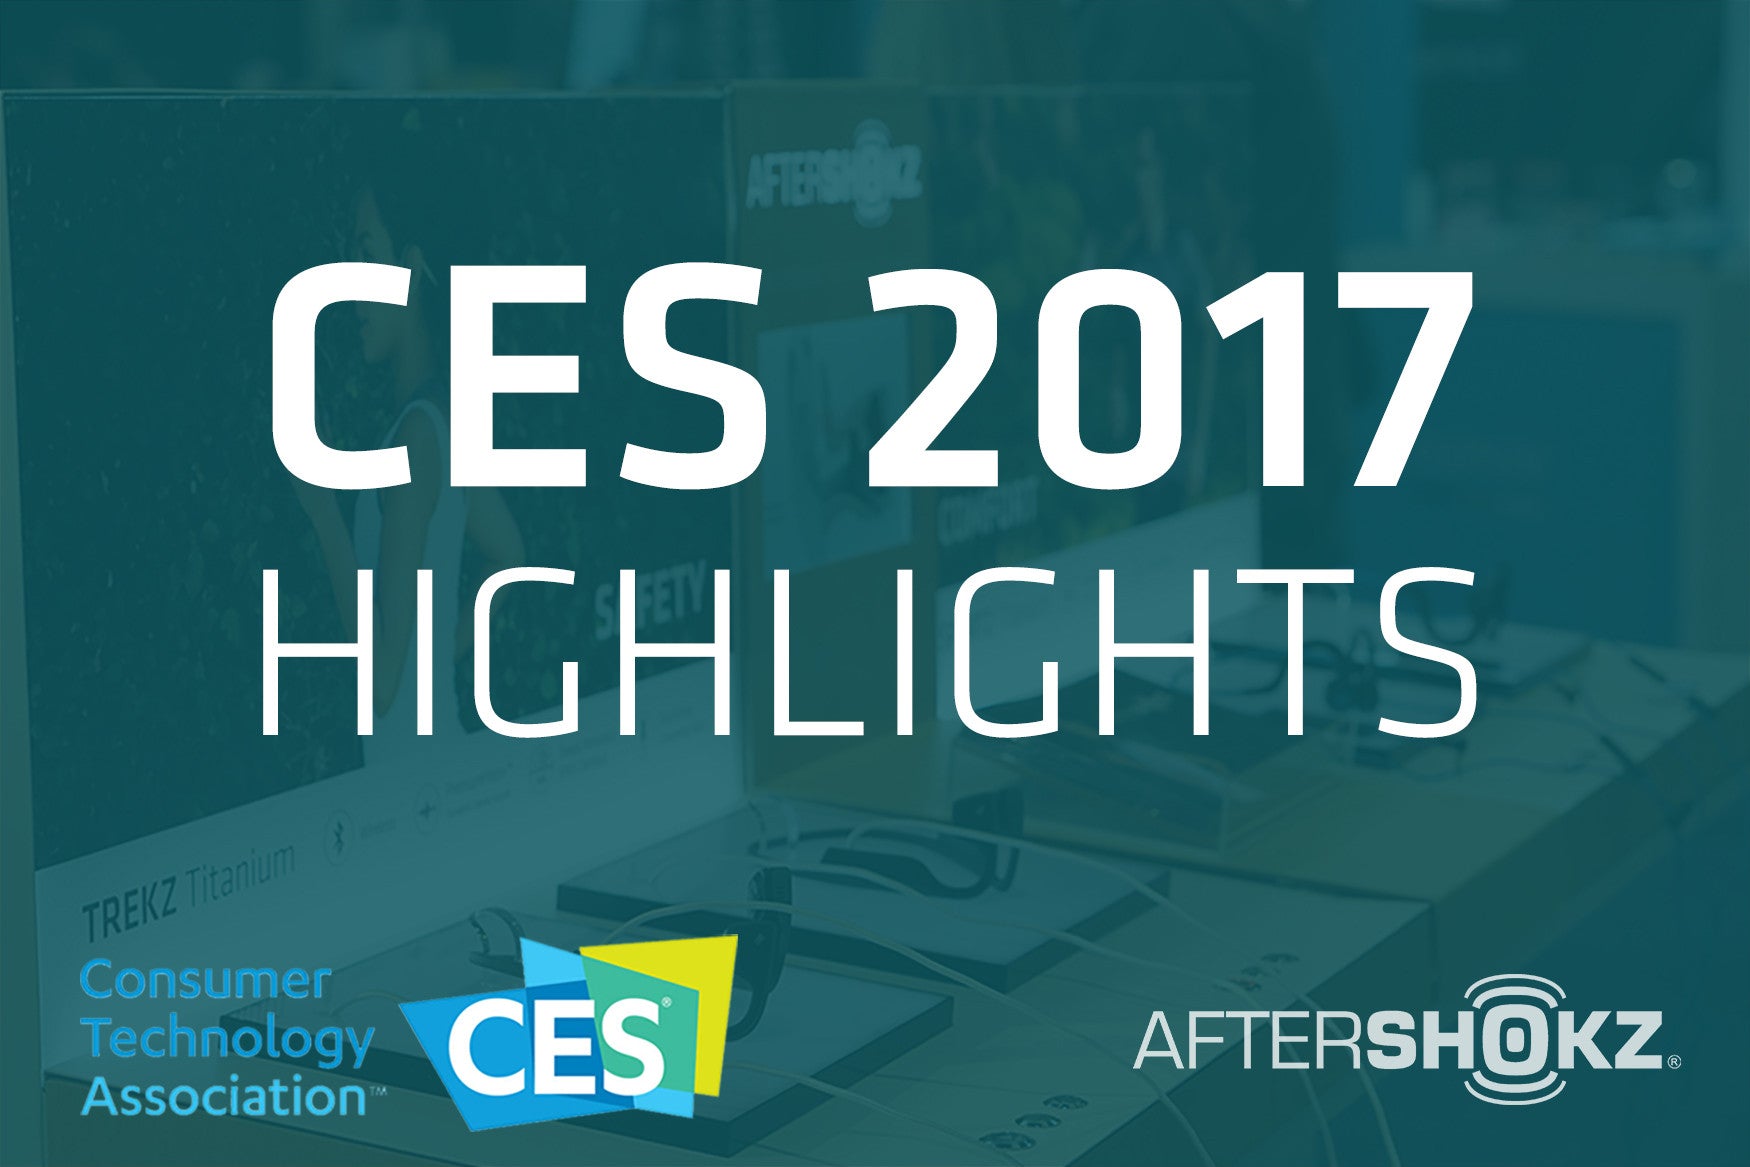 Highlights from the 2017 CES Trade Show